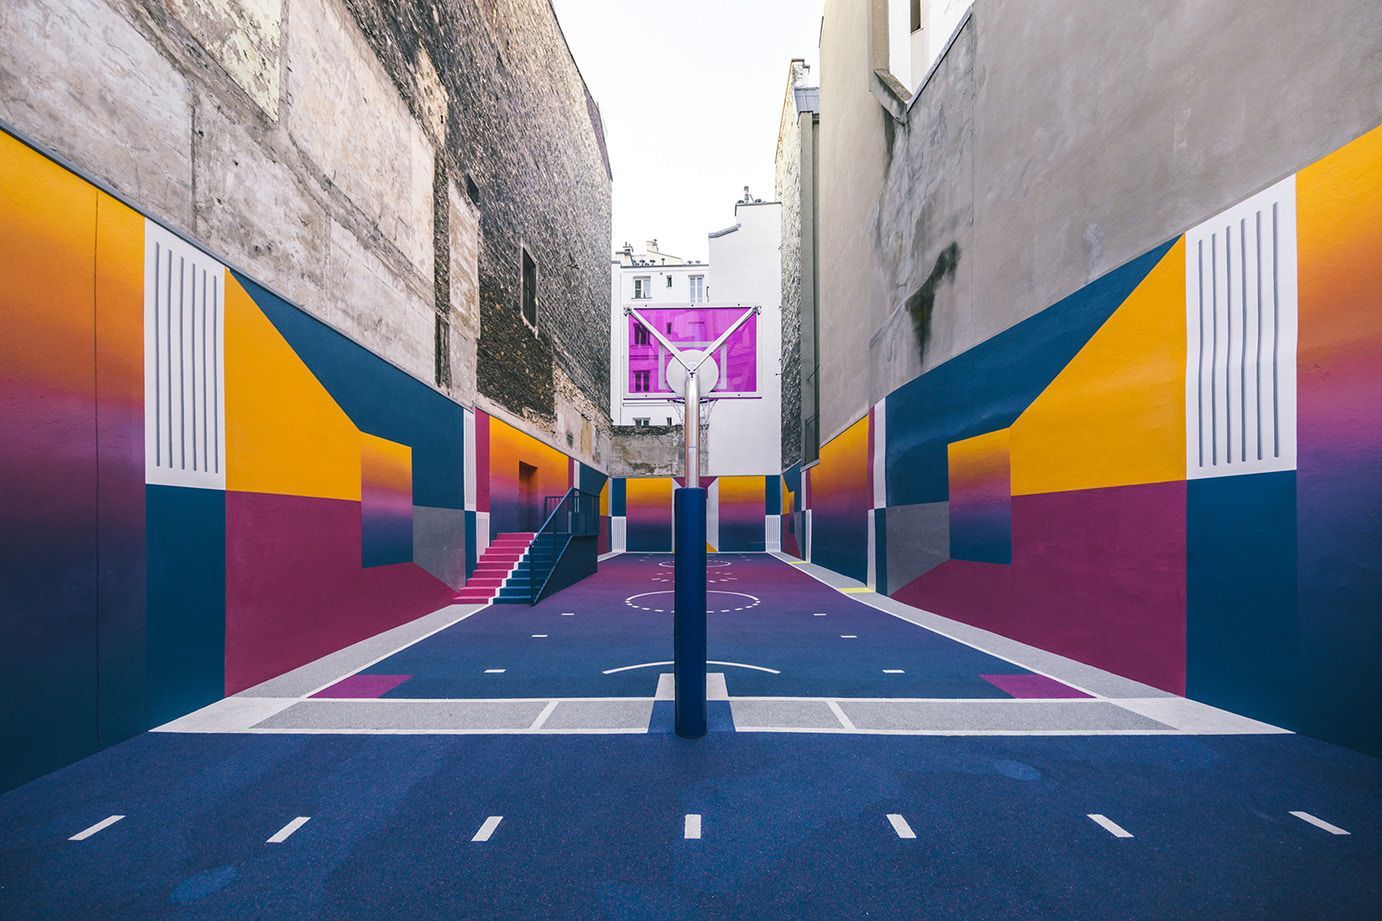 Surtido intelectual Prehistórico Nike and Pigalle realized the most colorful playground in the world